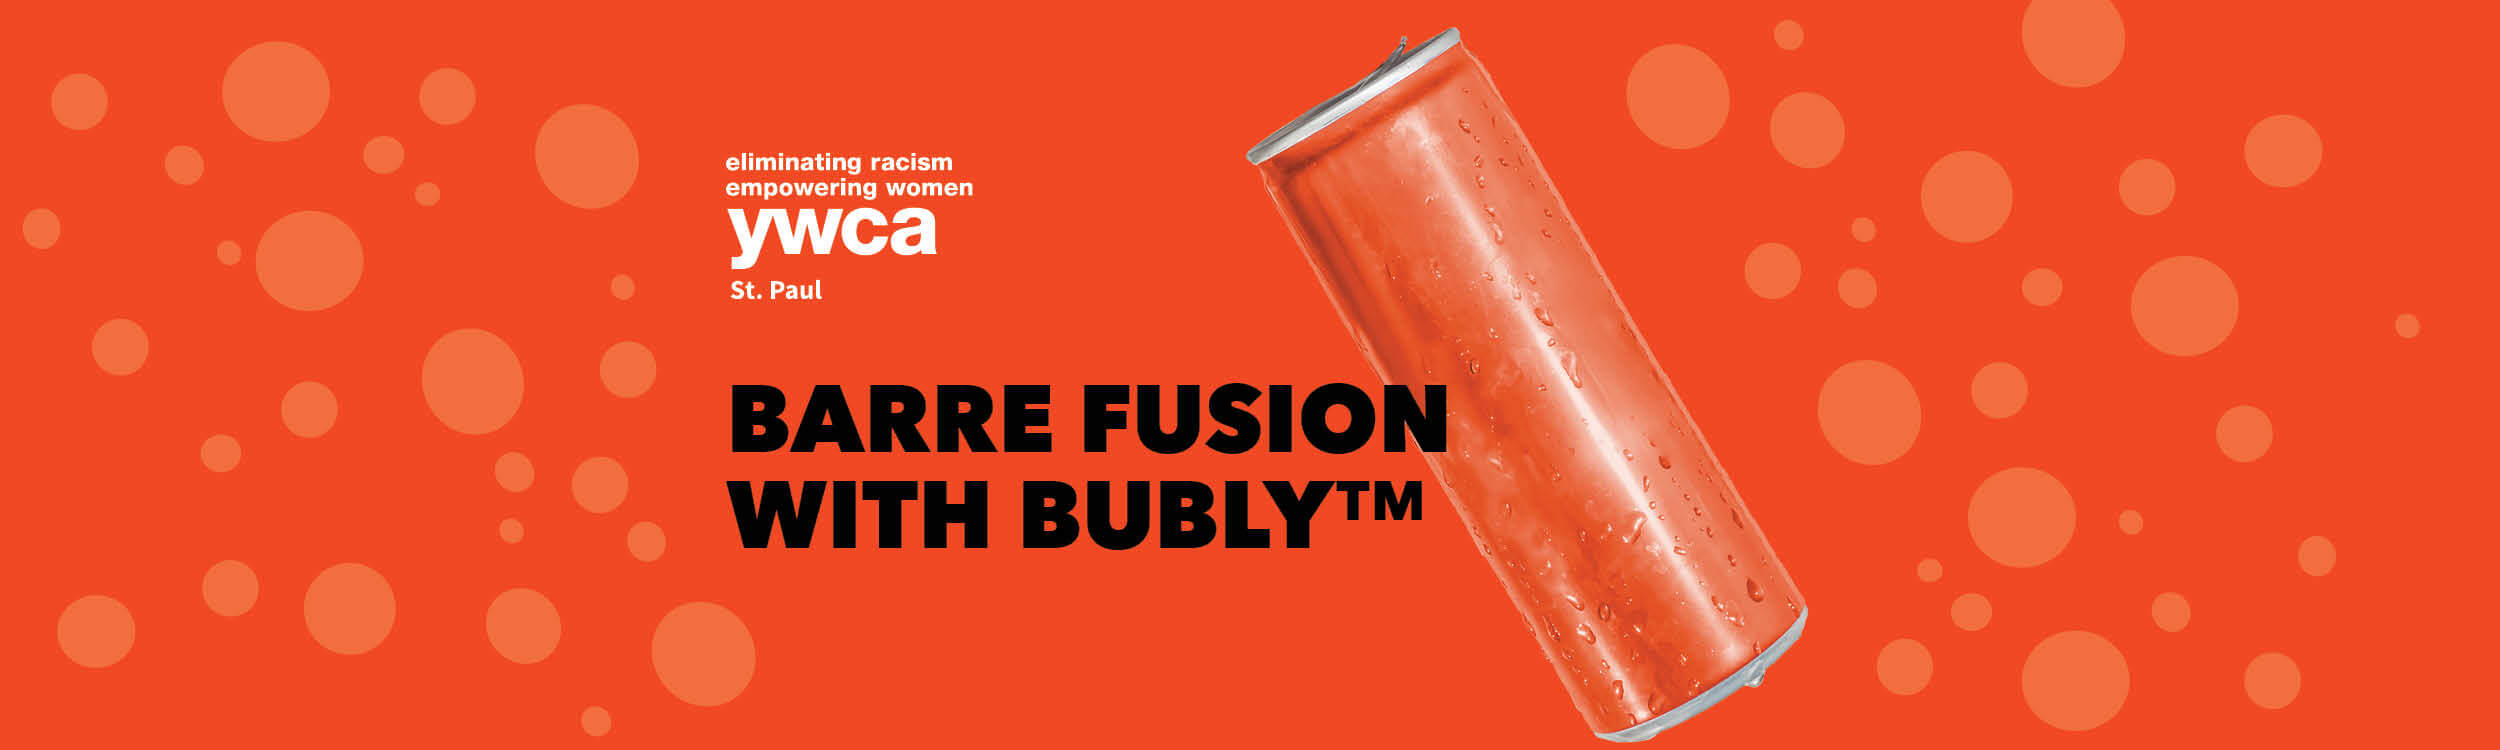 barre fusion with Bubly background image